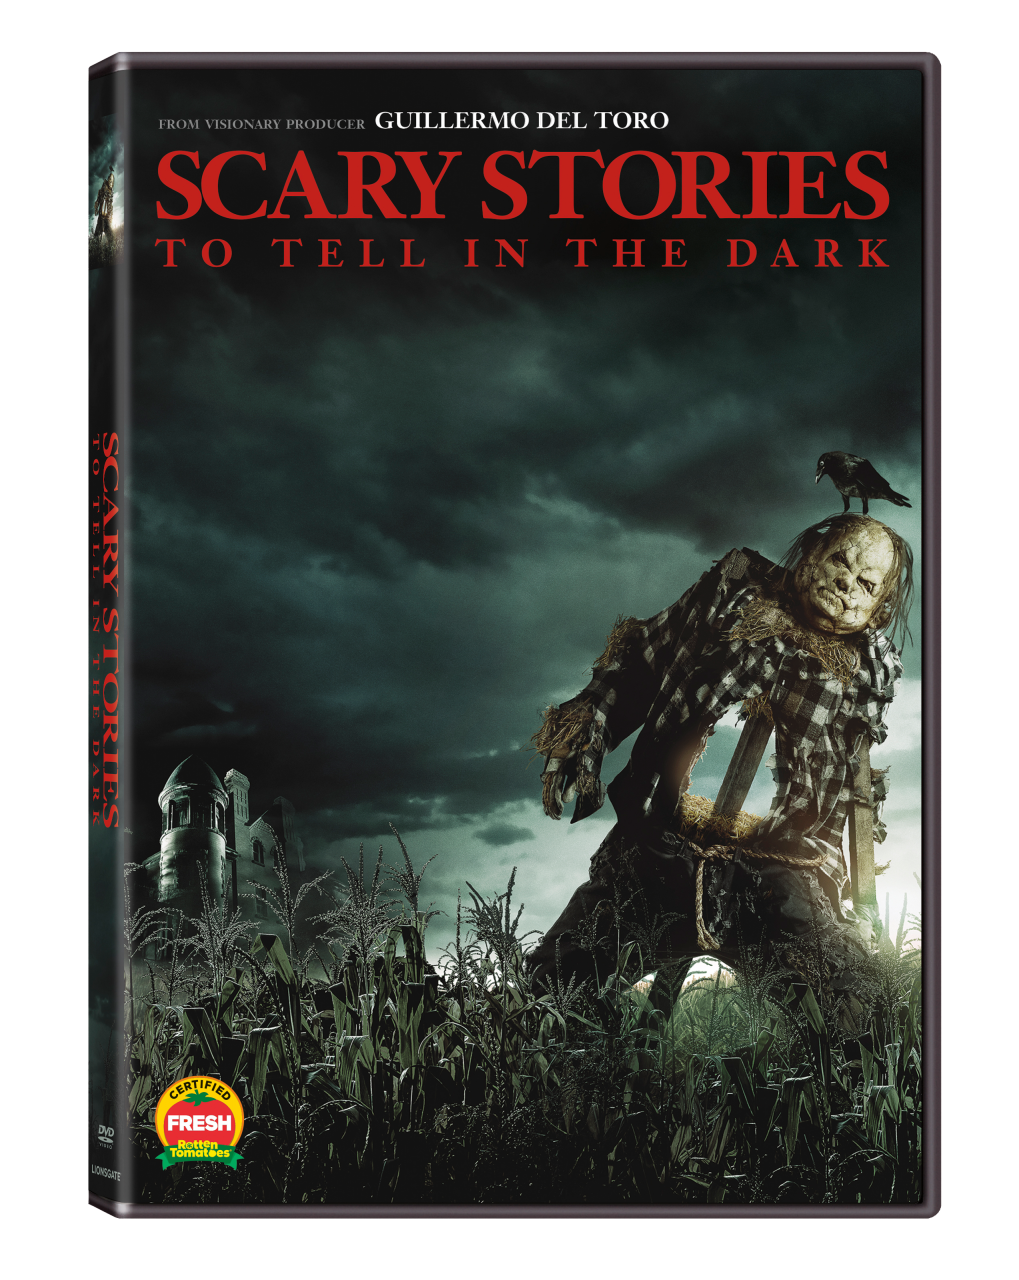  Scary Stories To Tell In The Dark 4DVD cover (Lionsgate Home Entertainment)